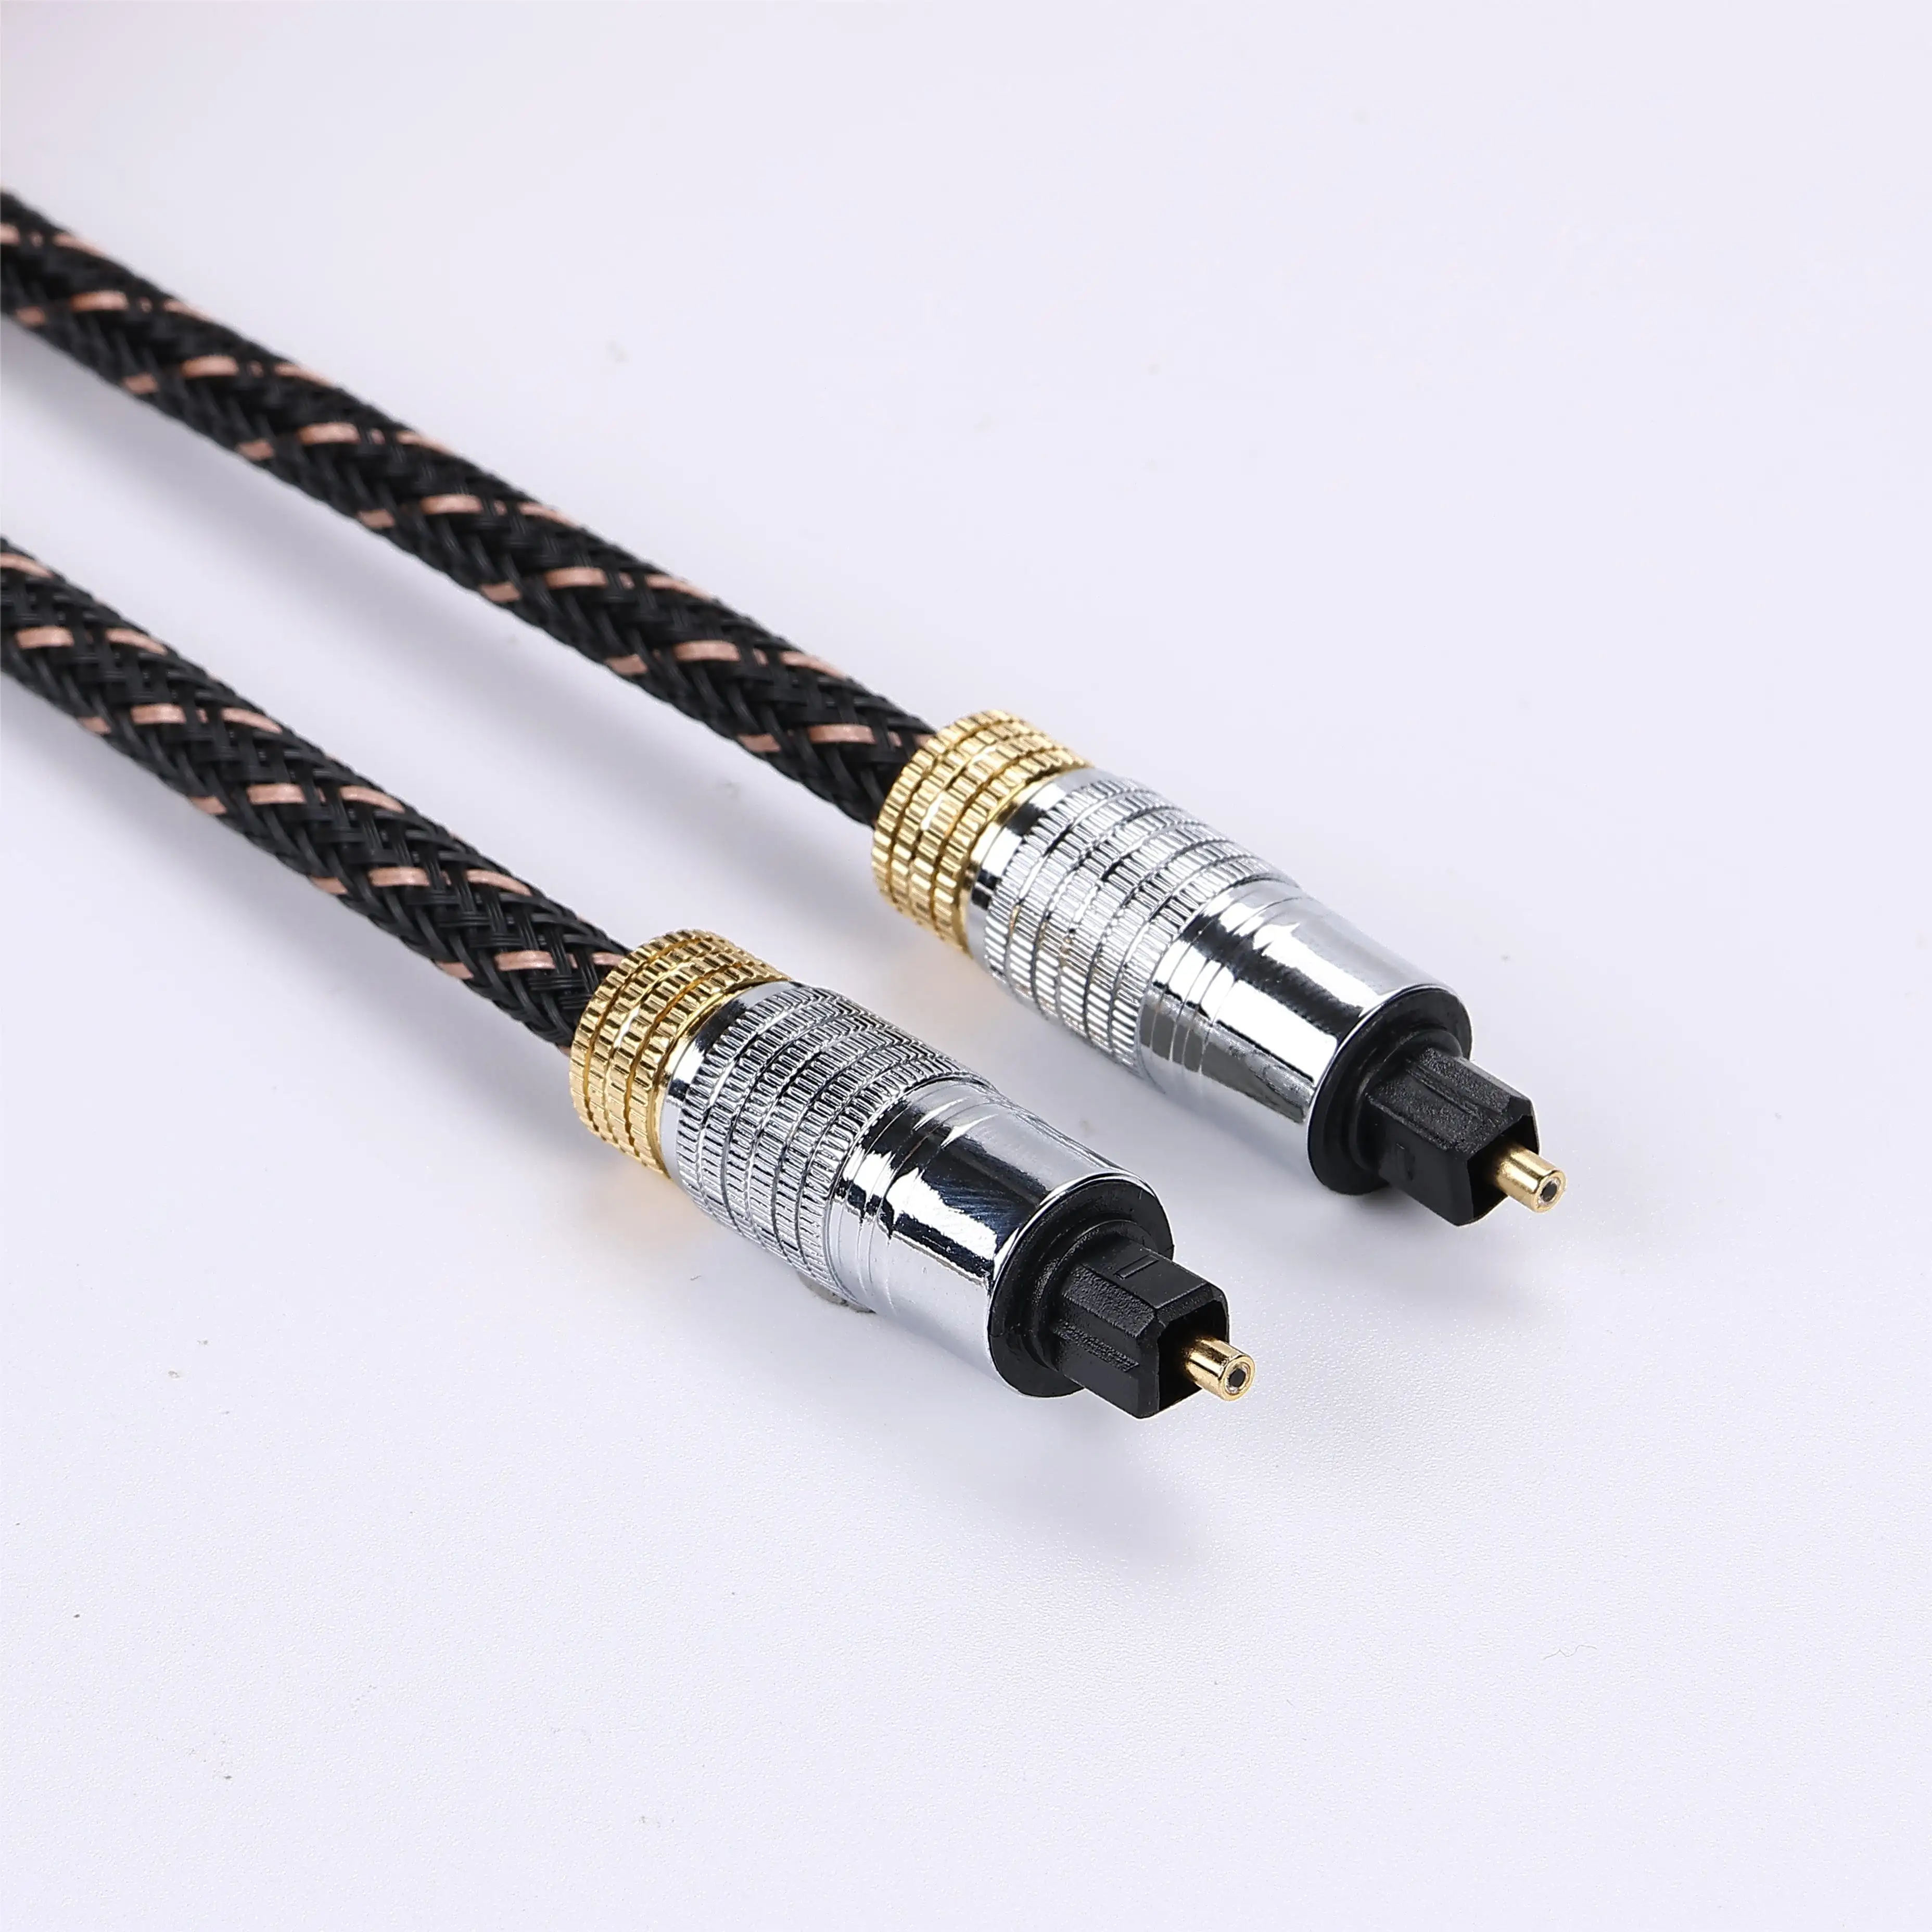 High Quality Audio Rca Cables Professional Audio Cable M Optical Cable Audio